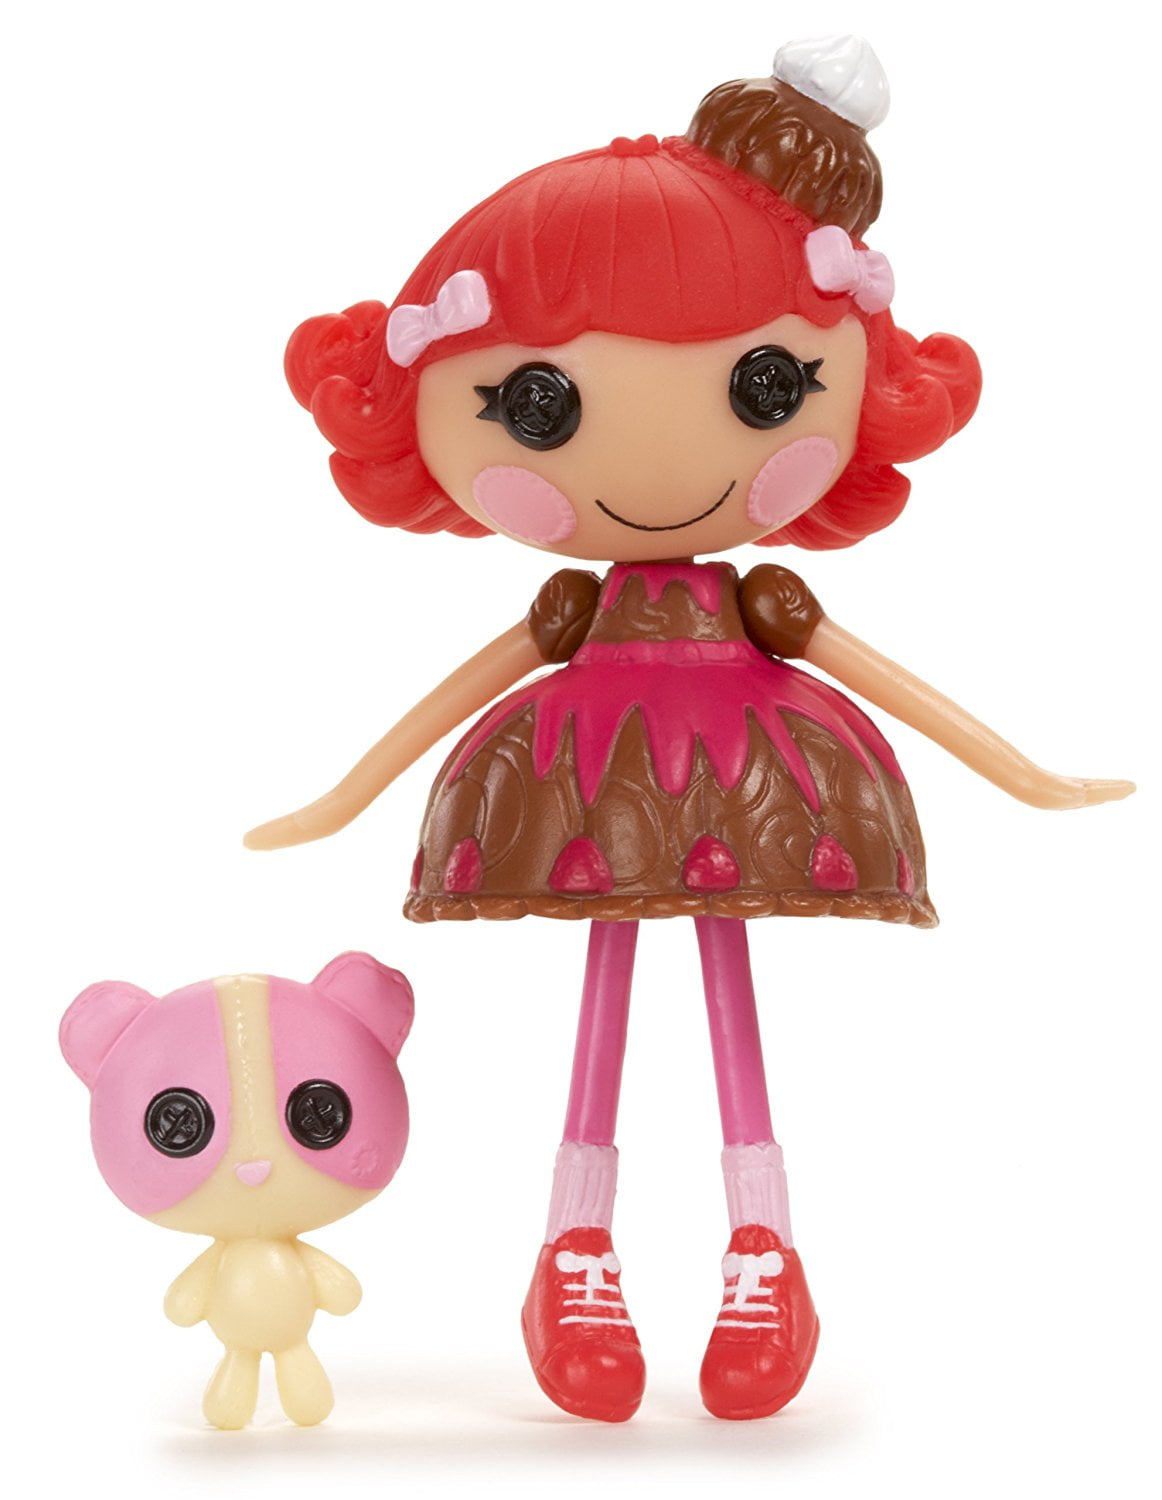 Mini Doll, Choco Whirl-N-Swirl, Doll has movable arms, legs and head By Lalaloopsy